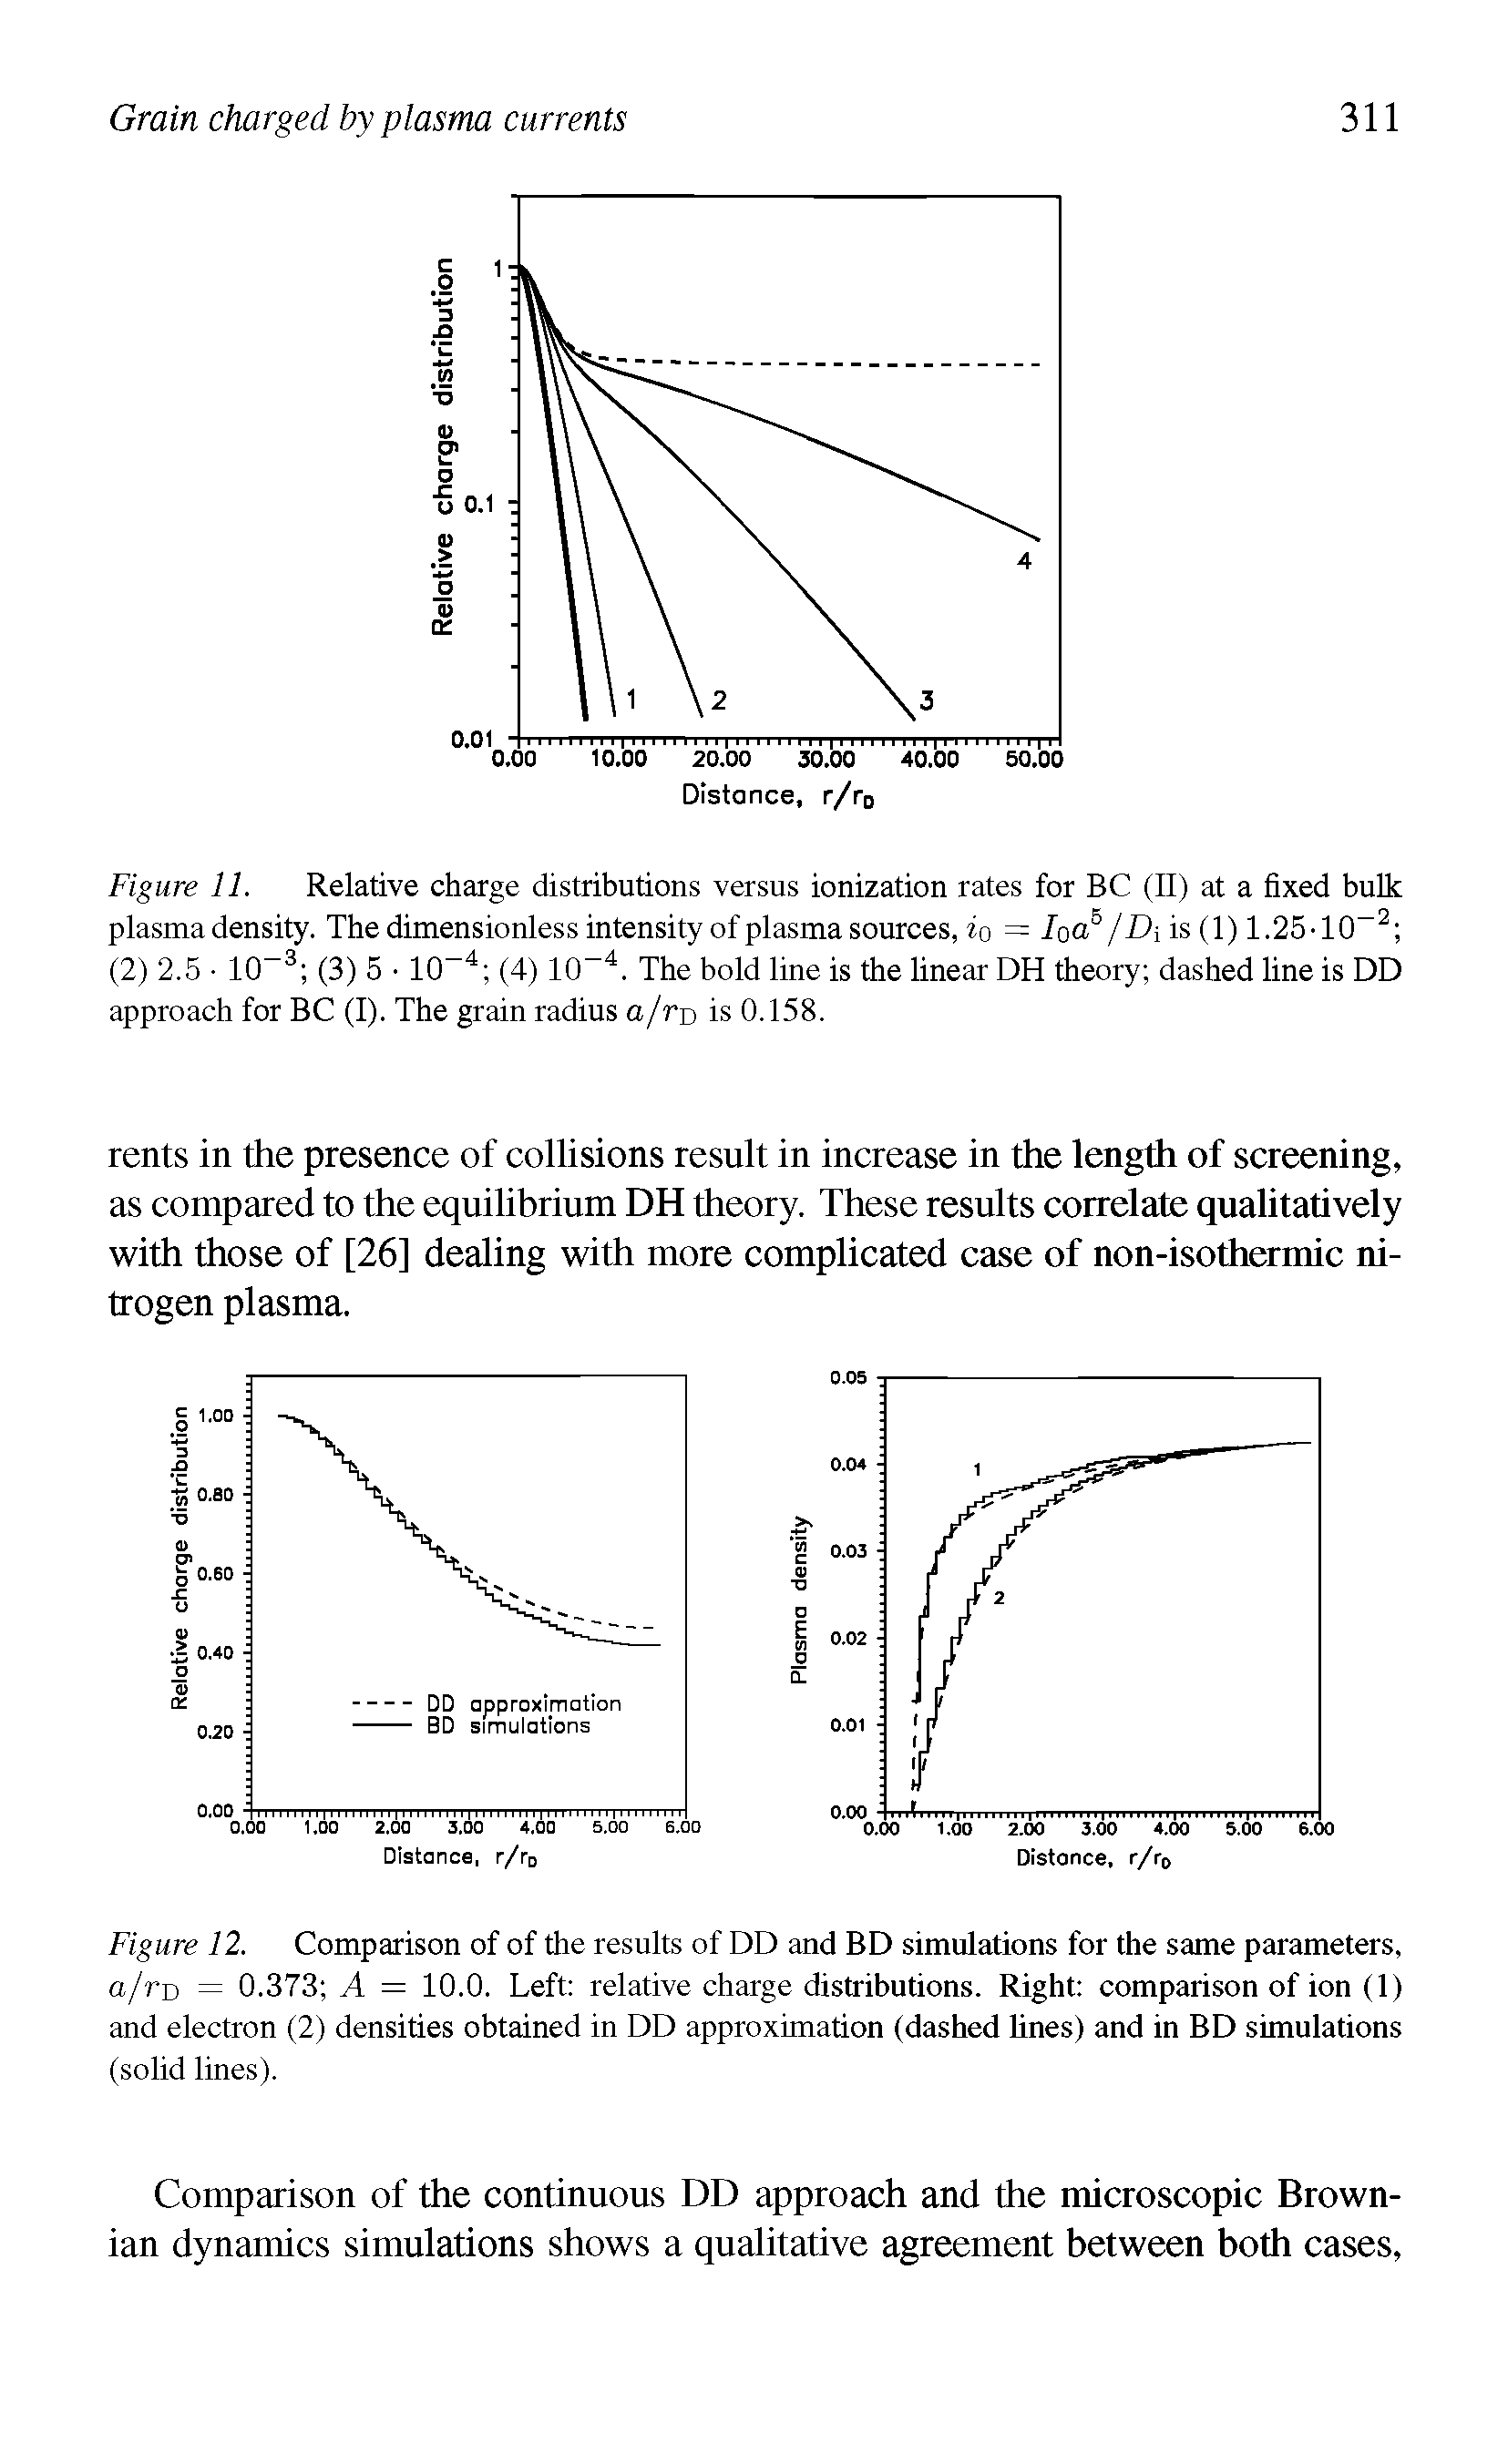 Figure 11. Relative charge distributions versus ionization rates for BC (II) at a fixed bulk plasma density. The dimensionless intensity of plasma sources, io = Ioa6/Di is (1) 1.25-10-2 (2) 2.5 10-3 (3) 5 10-4 (4) 10-4. The bold line is the linear DH theory dashed line is DD approach for BC (I). The grain radius a/ro is 0.158.